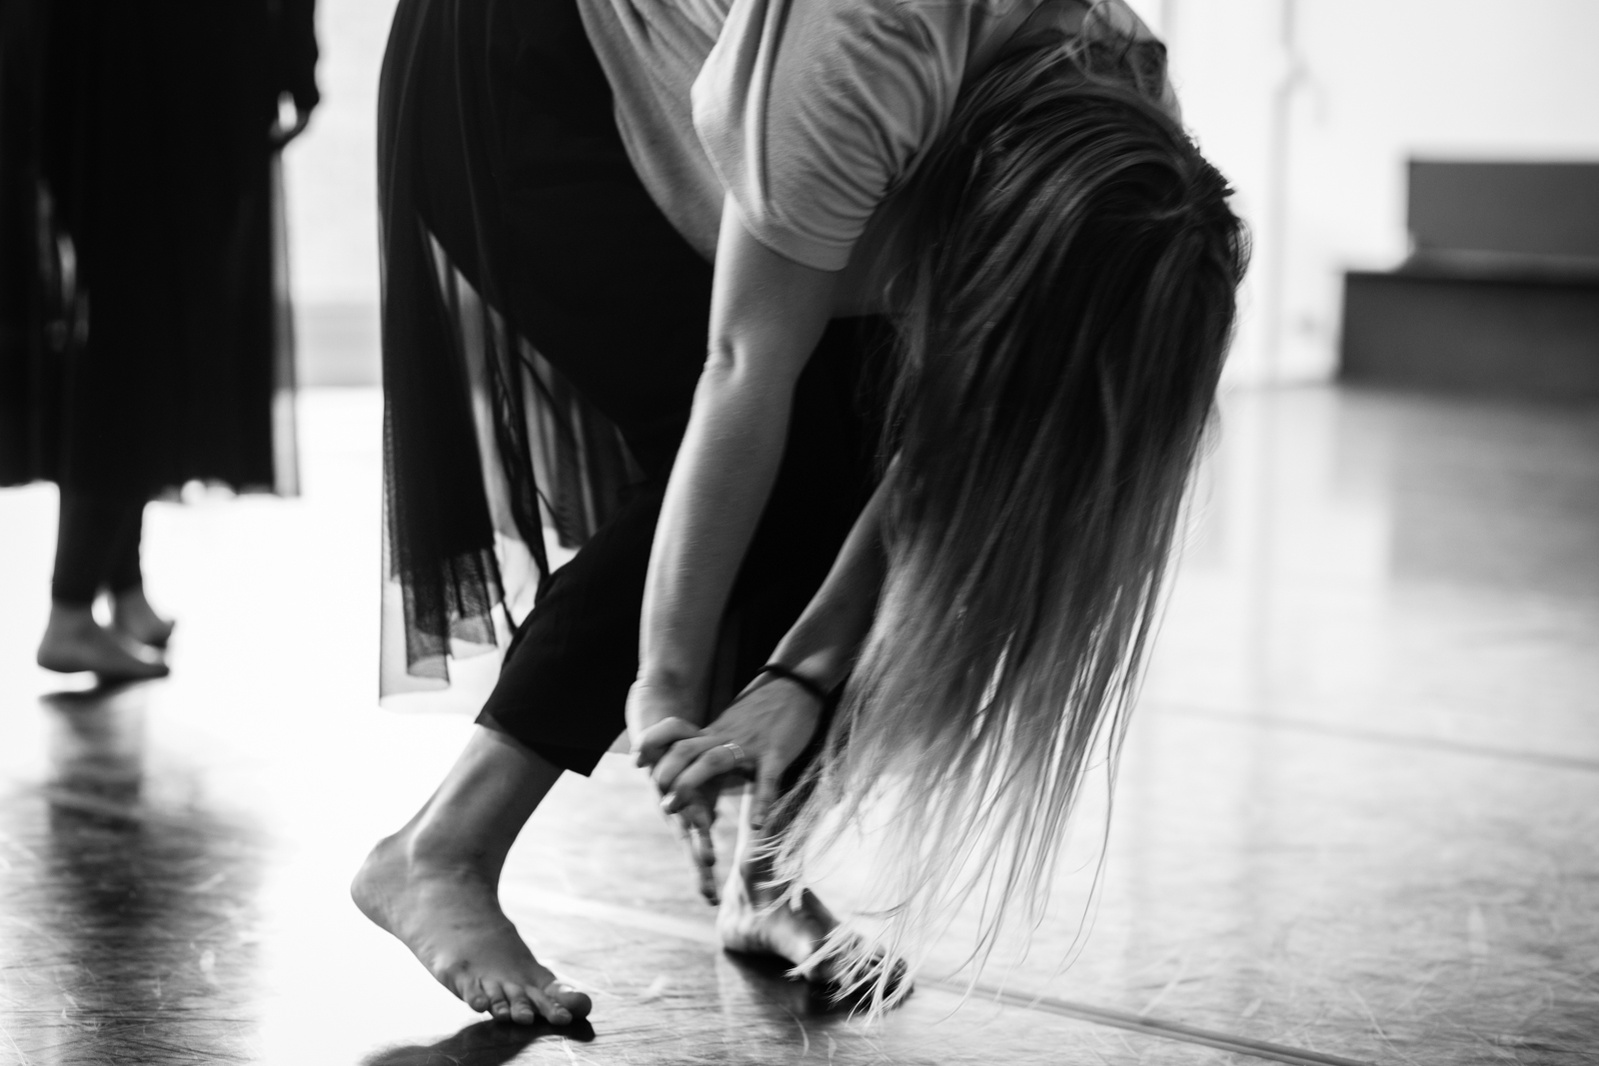 Detail of dancer bowing down during a dance routine, hair flowing down concealing her face